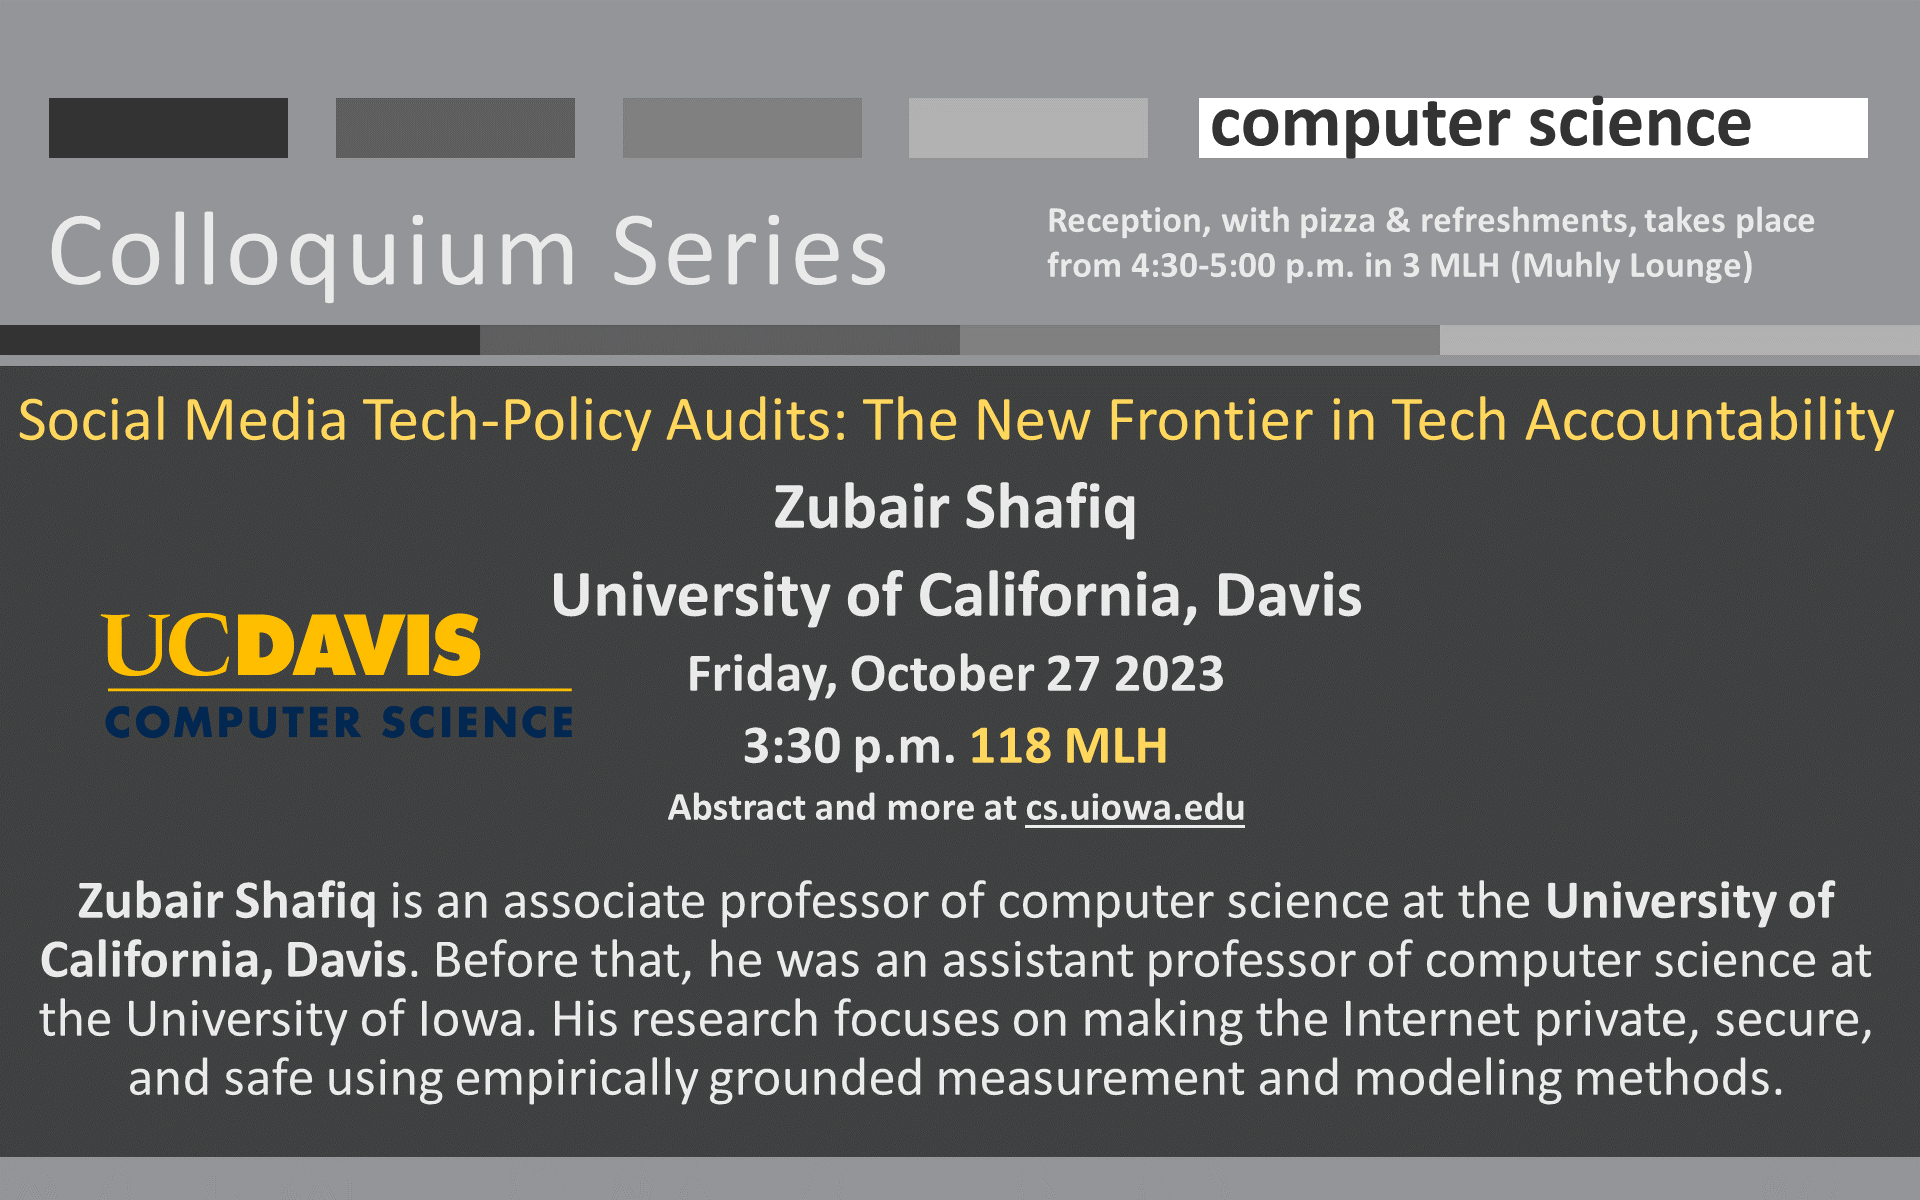 Computer Science - Colloquium: Social Media Tech-Policy Audits: The New Frontier in Tech Accountability Zubair Shafiq University of California, Davis Friday, October 27 2023 3:30 p.m. 118 MLH Abstract and more at cs.uiowa.edu  Zubair Shafiq is an associate professor of computer science at the University of California, Davis. Before that, he was an assistant professor of computer science at the University of Iowa. His research focuses on making the Internet private, secure, and safe using empirically grounded measurement and modeling methods.  Reception, with pizza and refreshments, takes place from 4:30-5:00 p.m. in 3 MLH (Muhly Lounge)